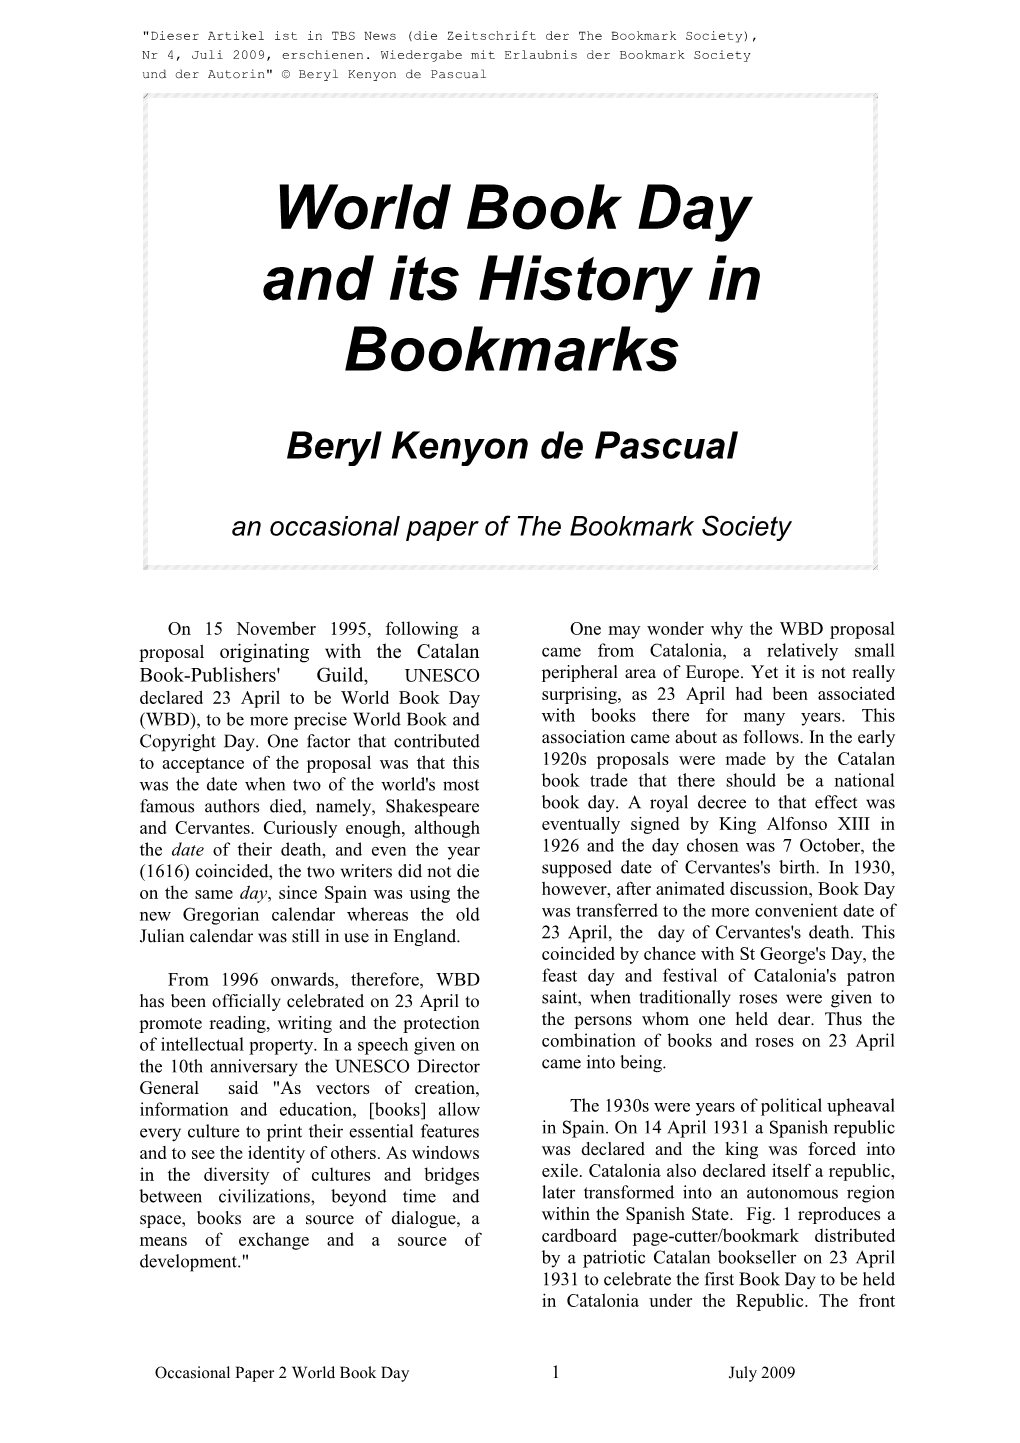 World Book Day and Its History in Bookmarks